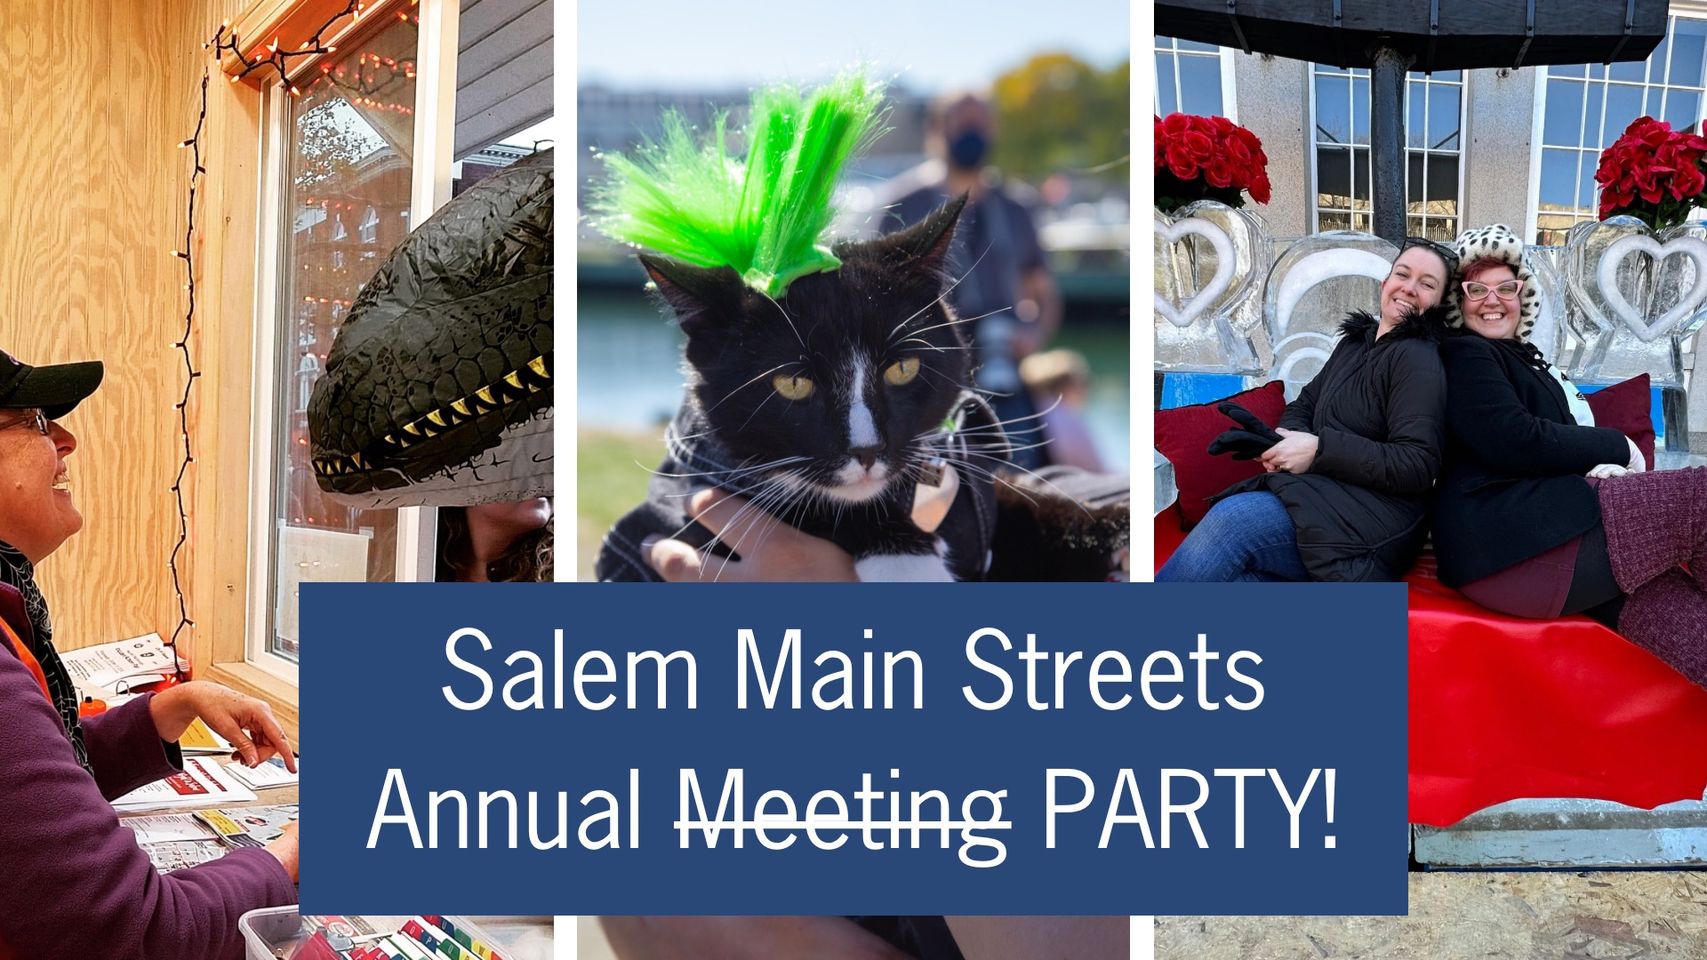 Don't miss out on the experience highlighted by the inviting collage of our annual Salem Main Streets gathering! This social event offers an enjoyable registration process, attendees relaxing in a charming outdoor heart-shaped seating area and even includes an endearing costumed kitty. Don't hesitate to connect with your community at this popular yearly assembly!